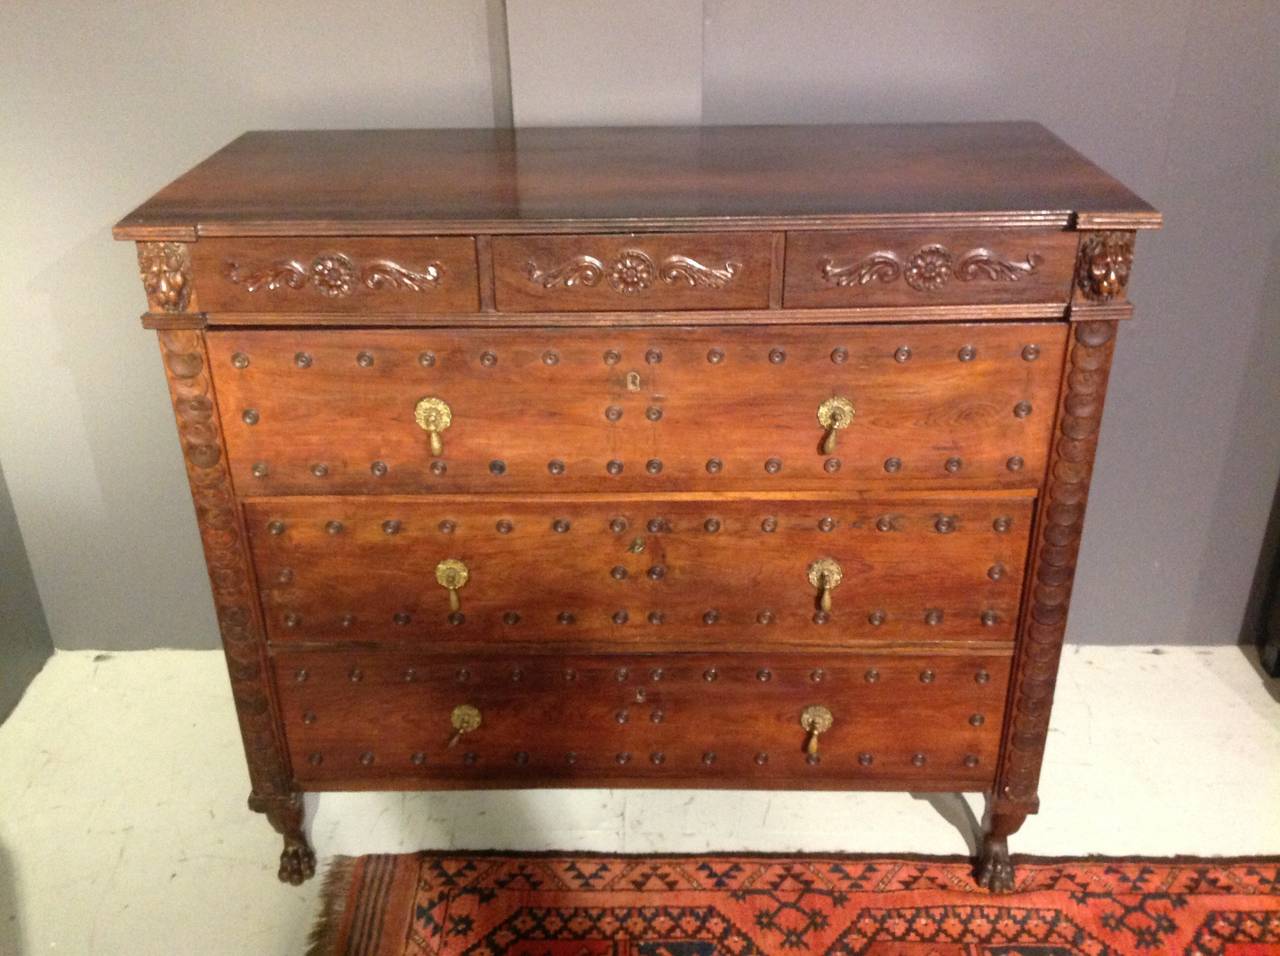 A top quality and very unusual 19th century rosewood chest of drawers with beautiful hand-carved, classical style details, lion's heads, paw feet and rosettes.